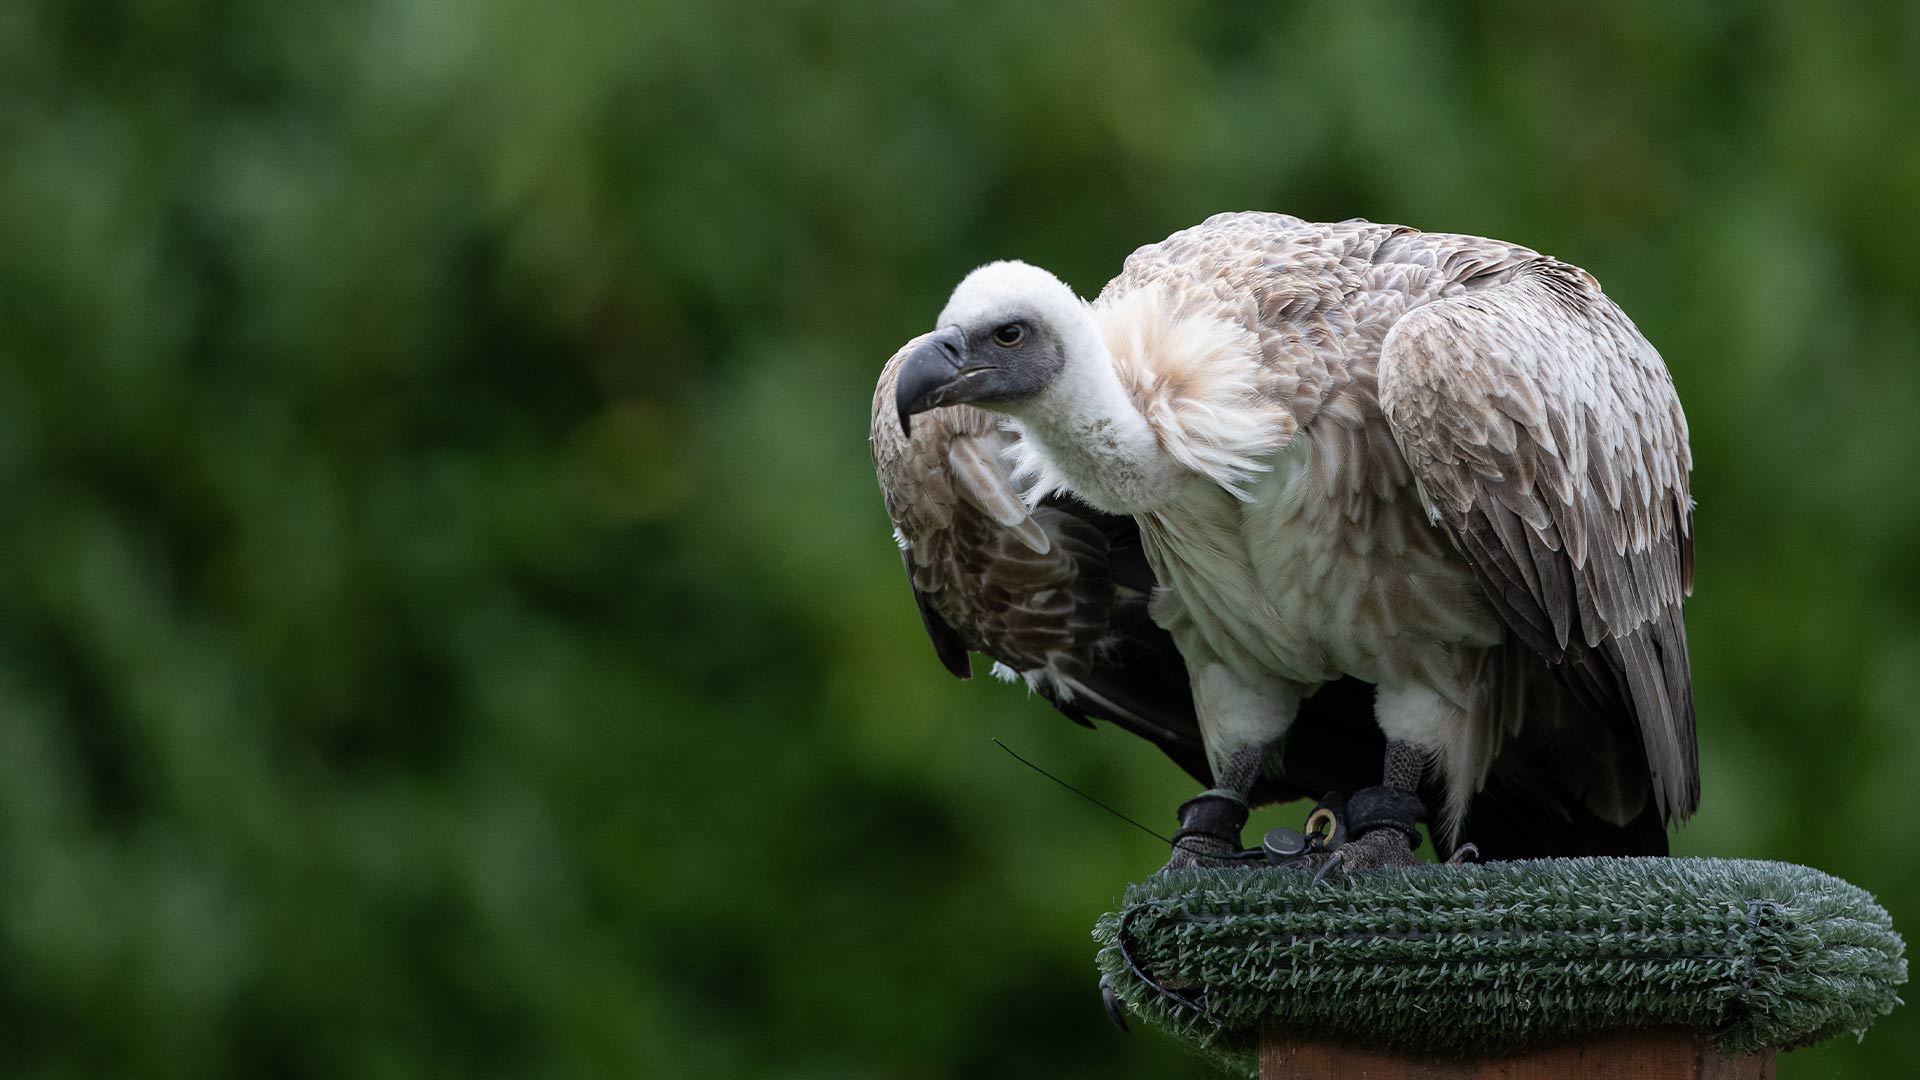 African white-backed vulture hunched over while standing on platform